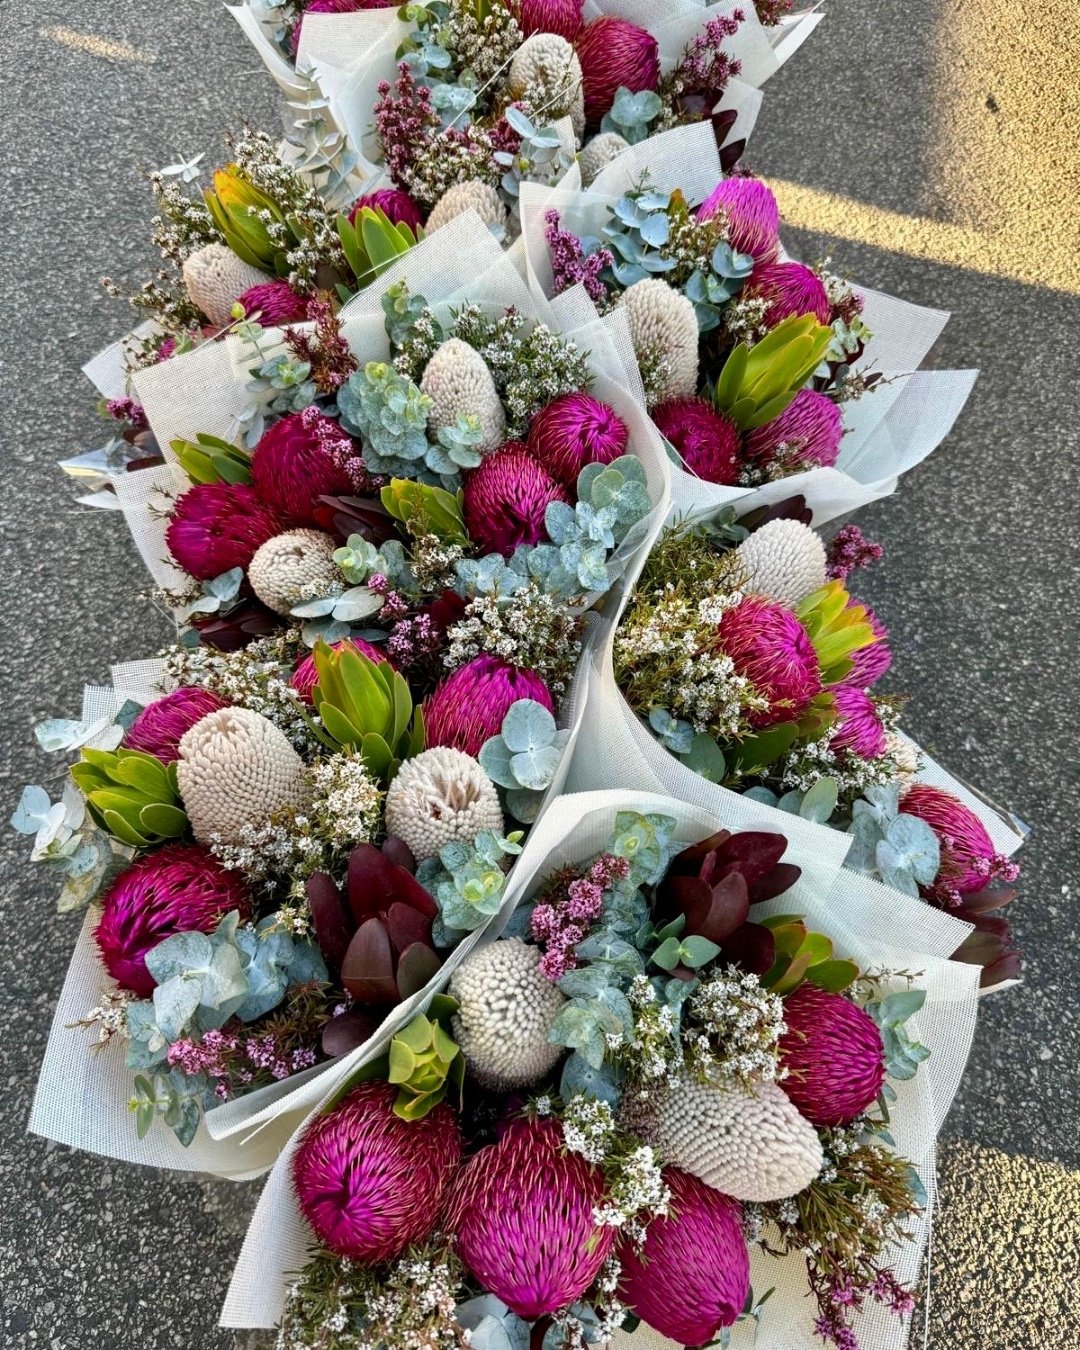 What a beautiful BUNCH!💐

Our floral arrangements are one-of-a-kind and sure to make her day! 

Head to the Flower Market Herdsman we are open every day from 7 am - 8 pm! 🌷🌻

#FloristPerth #BloomInPerth #PerthBlooms #FloralInspirationPerth
#PerthF